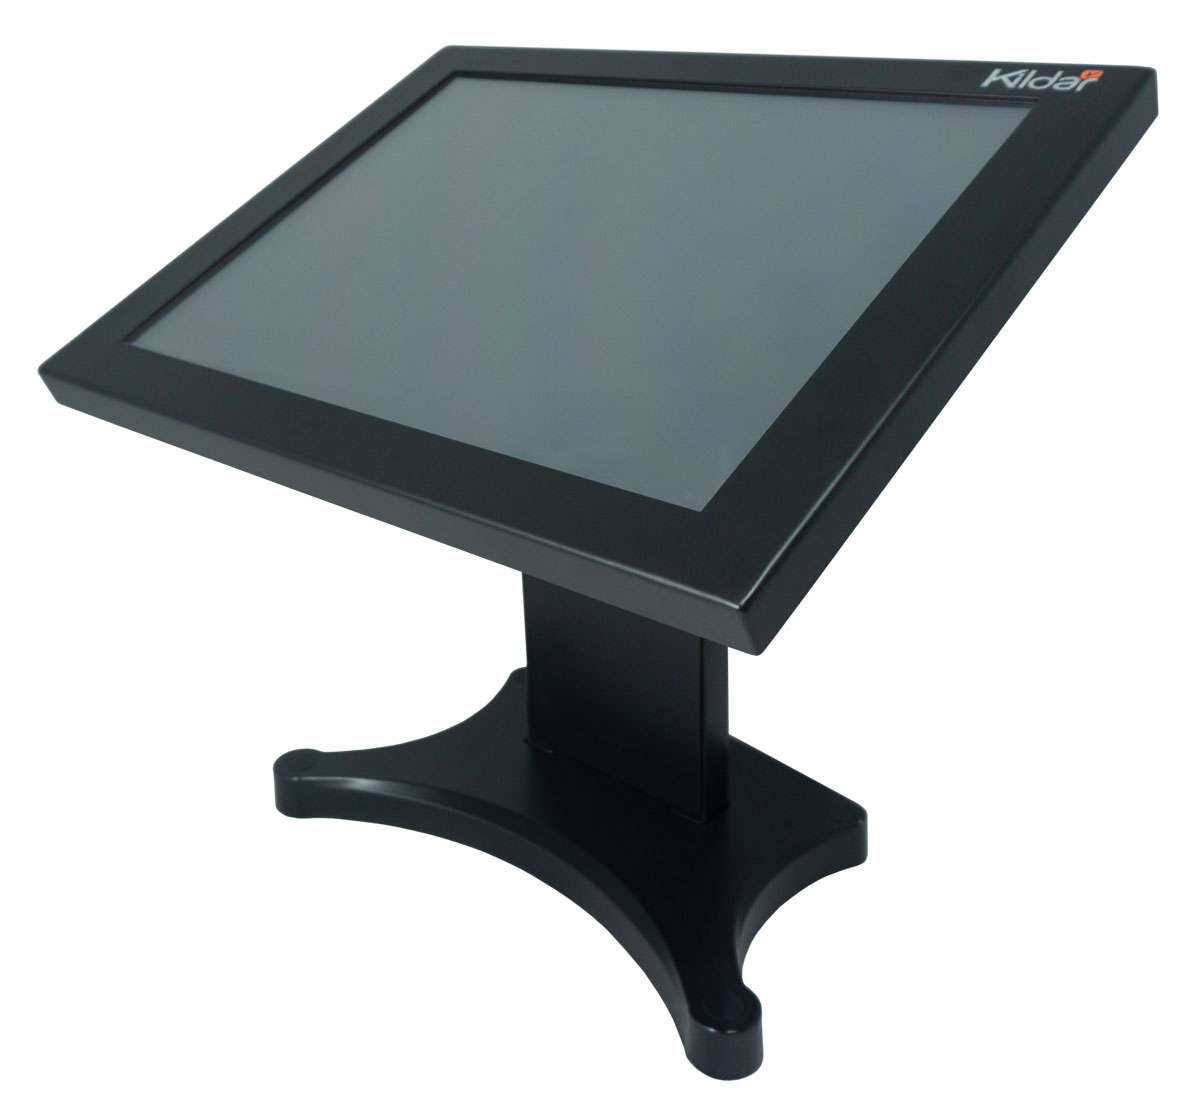 KILDAR - POS Touch Screen Terminals - DataTouch T1582 - Left